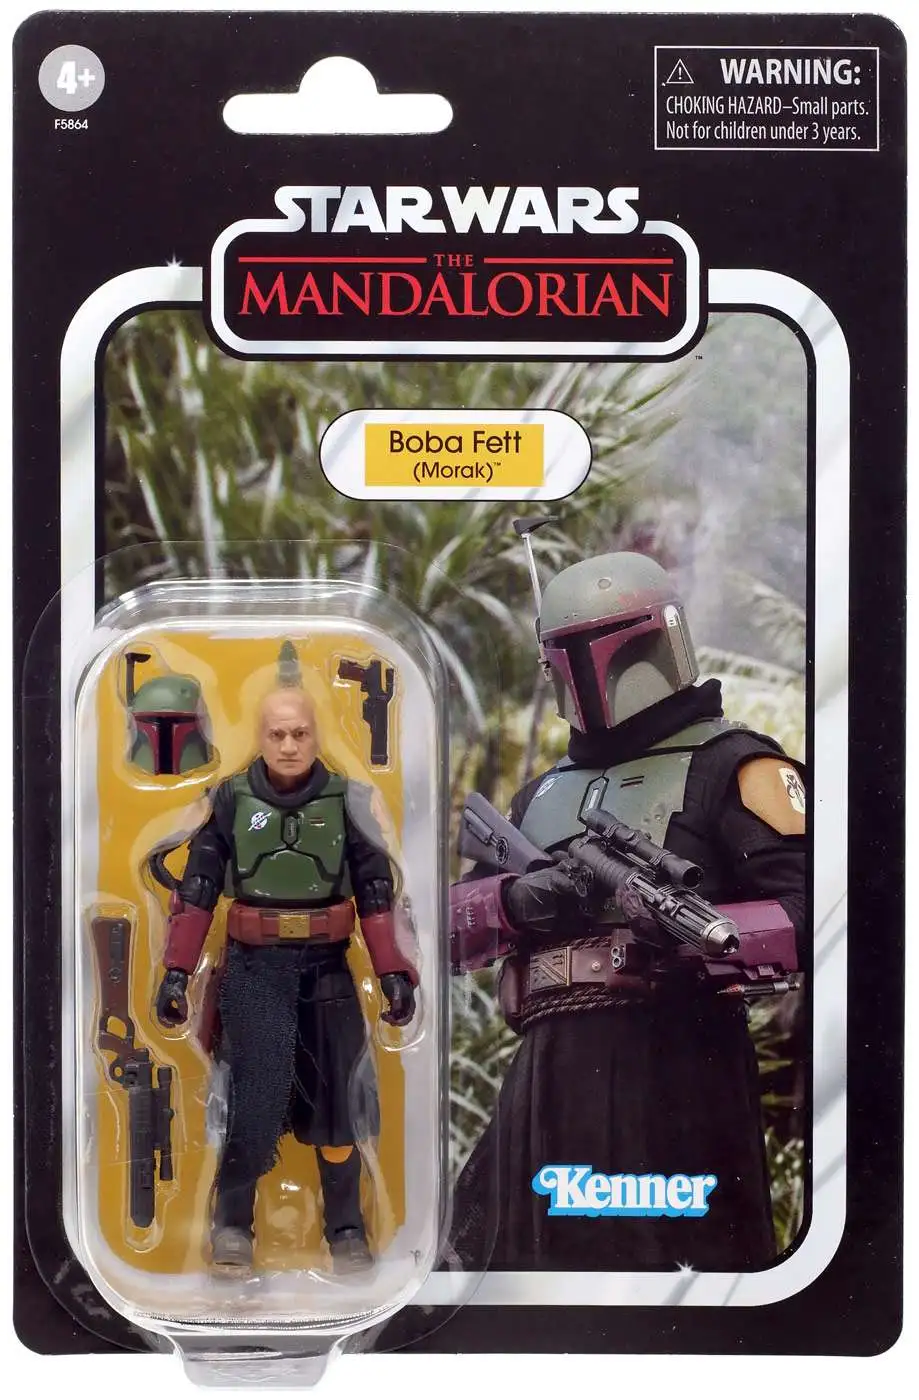 Star Wars: The Mandalorian Vintage Collection figurine The